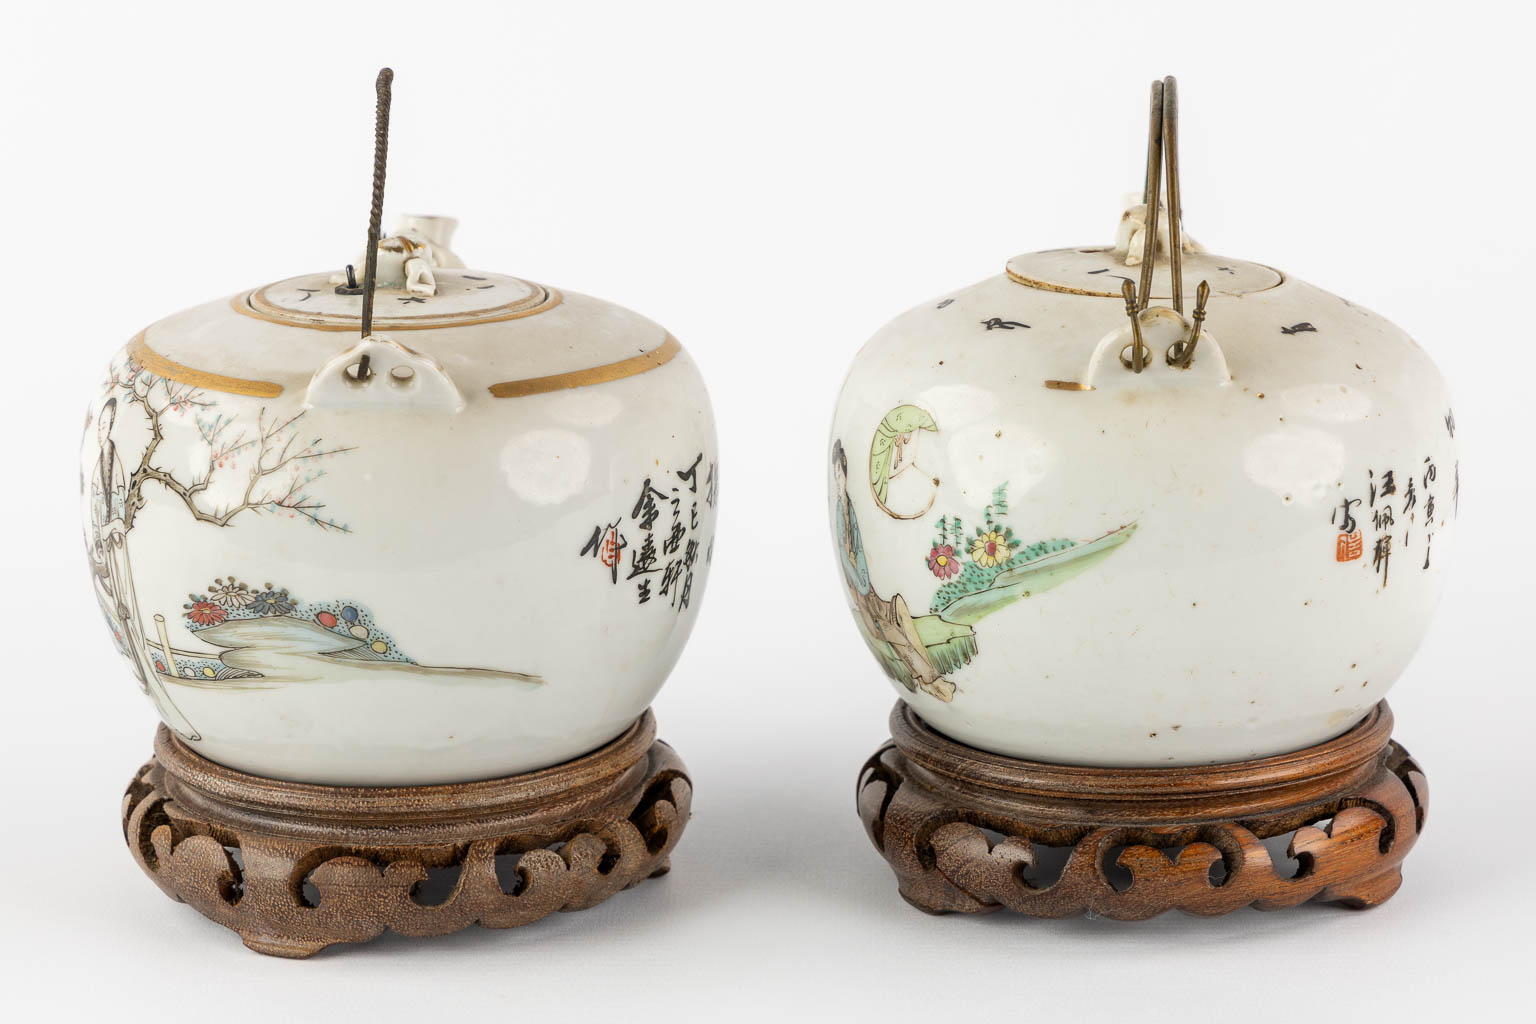 Two Chinese teapots, decorated with figurines. (L:13 x W:17,5 x H:10 cm) - Image 6 of 14